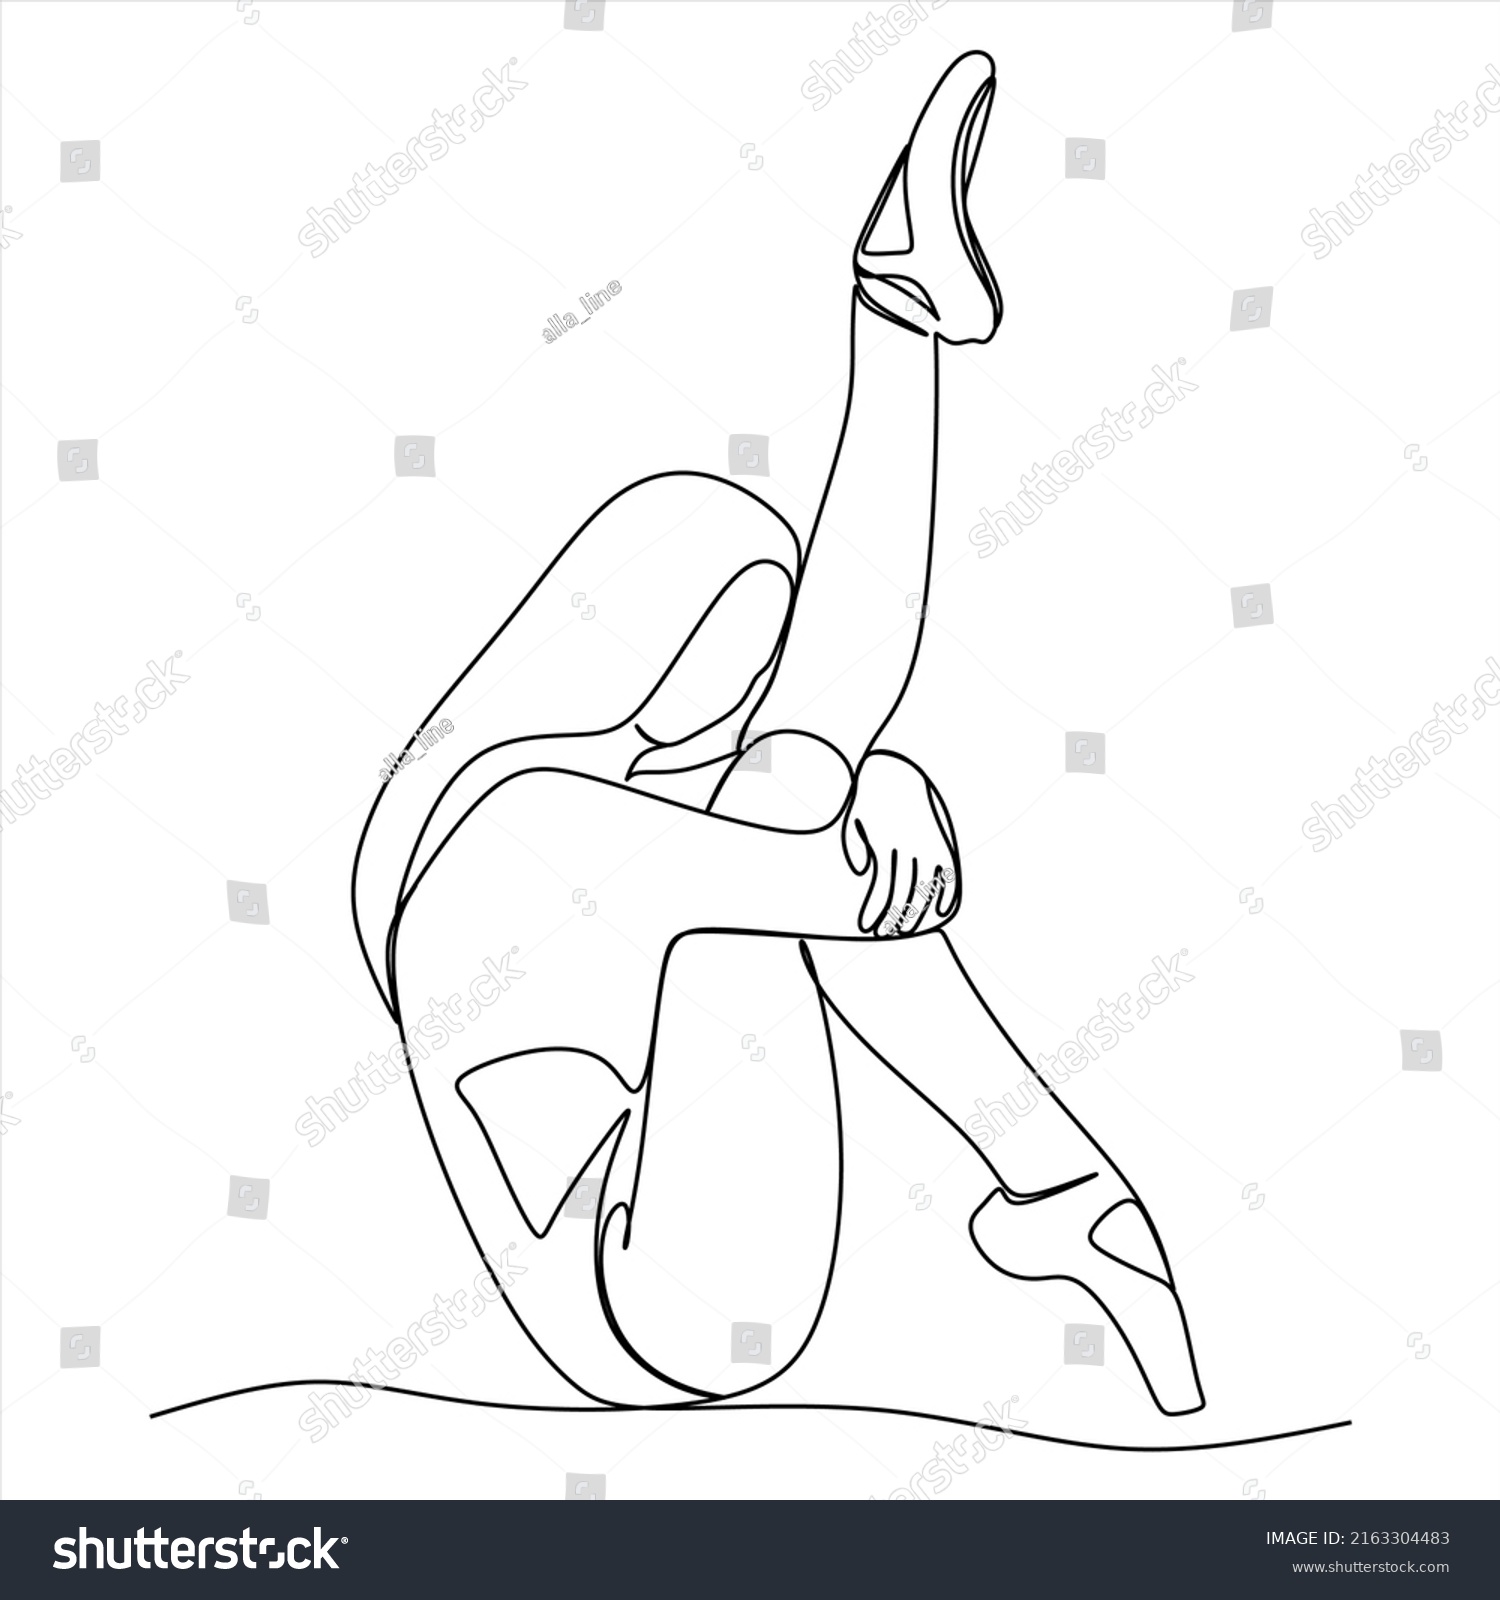 Continuous Line Drawing Ballerina Ballet Dancer Stock Vector Royalty Free 2163304483 